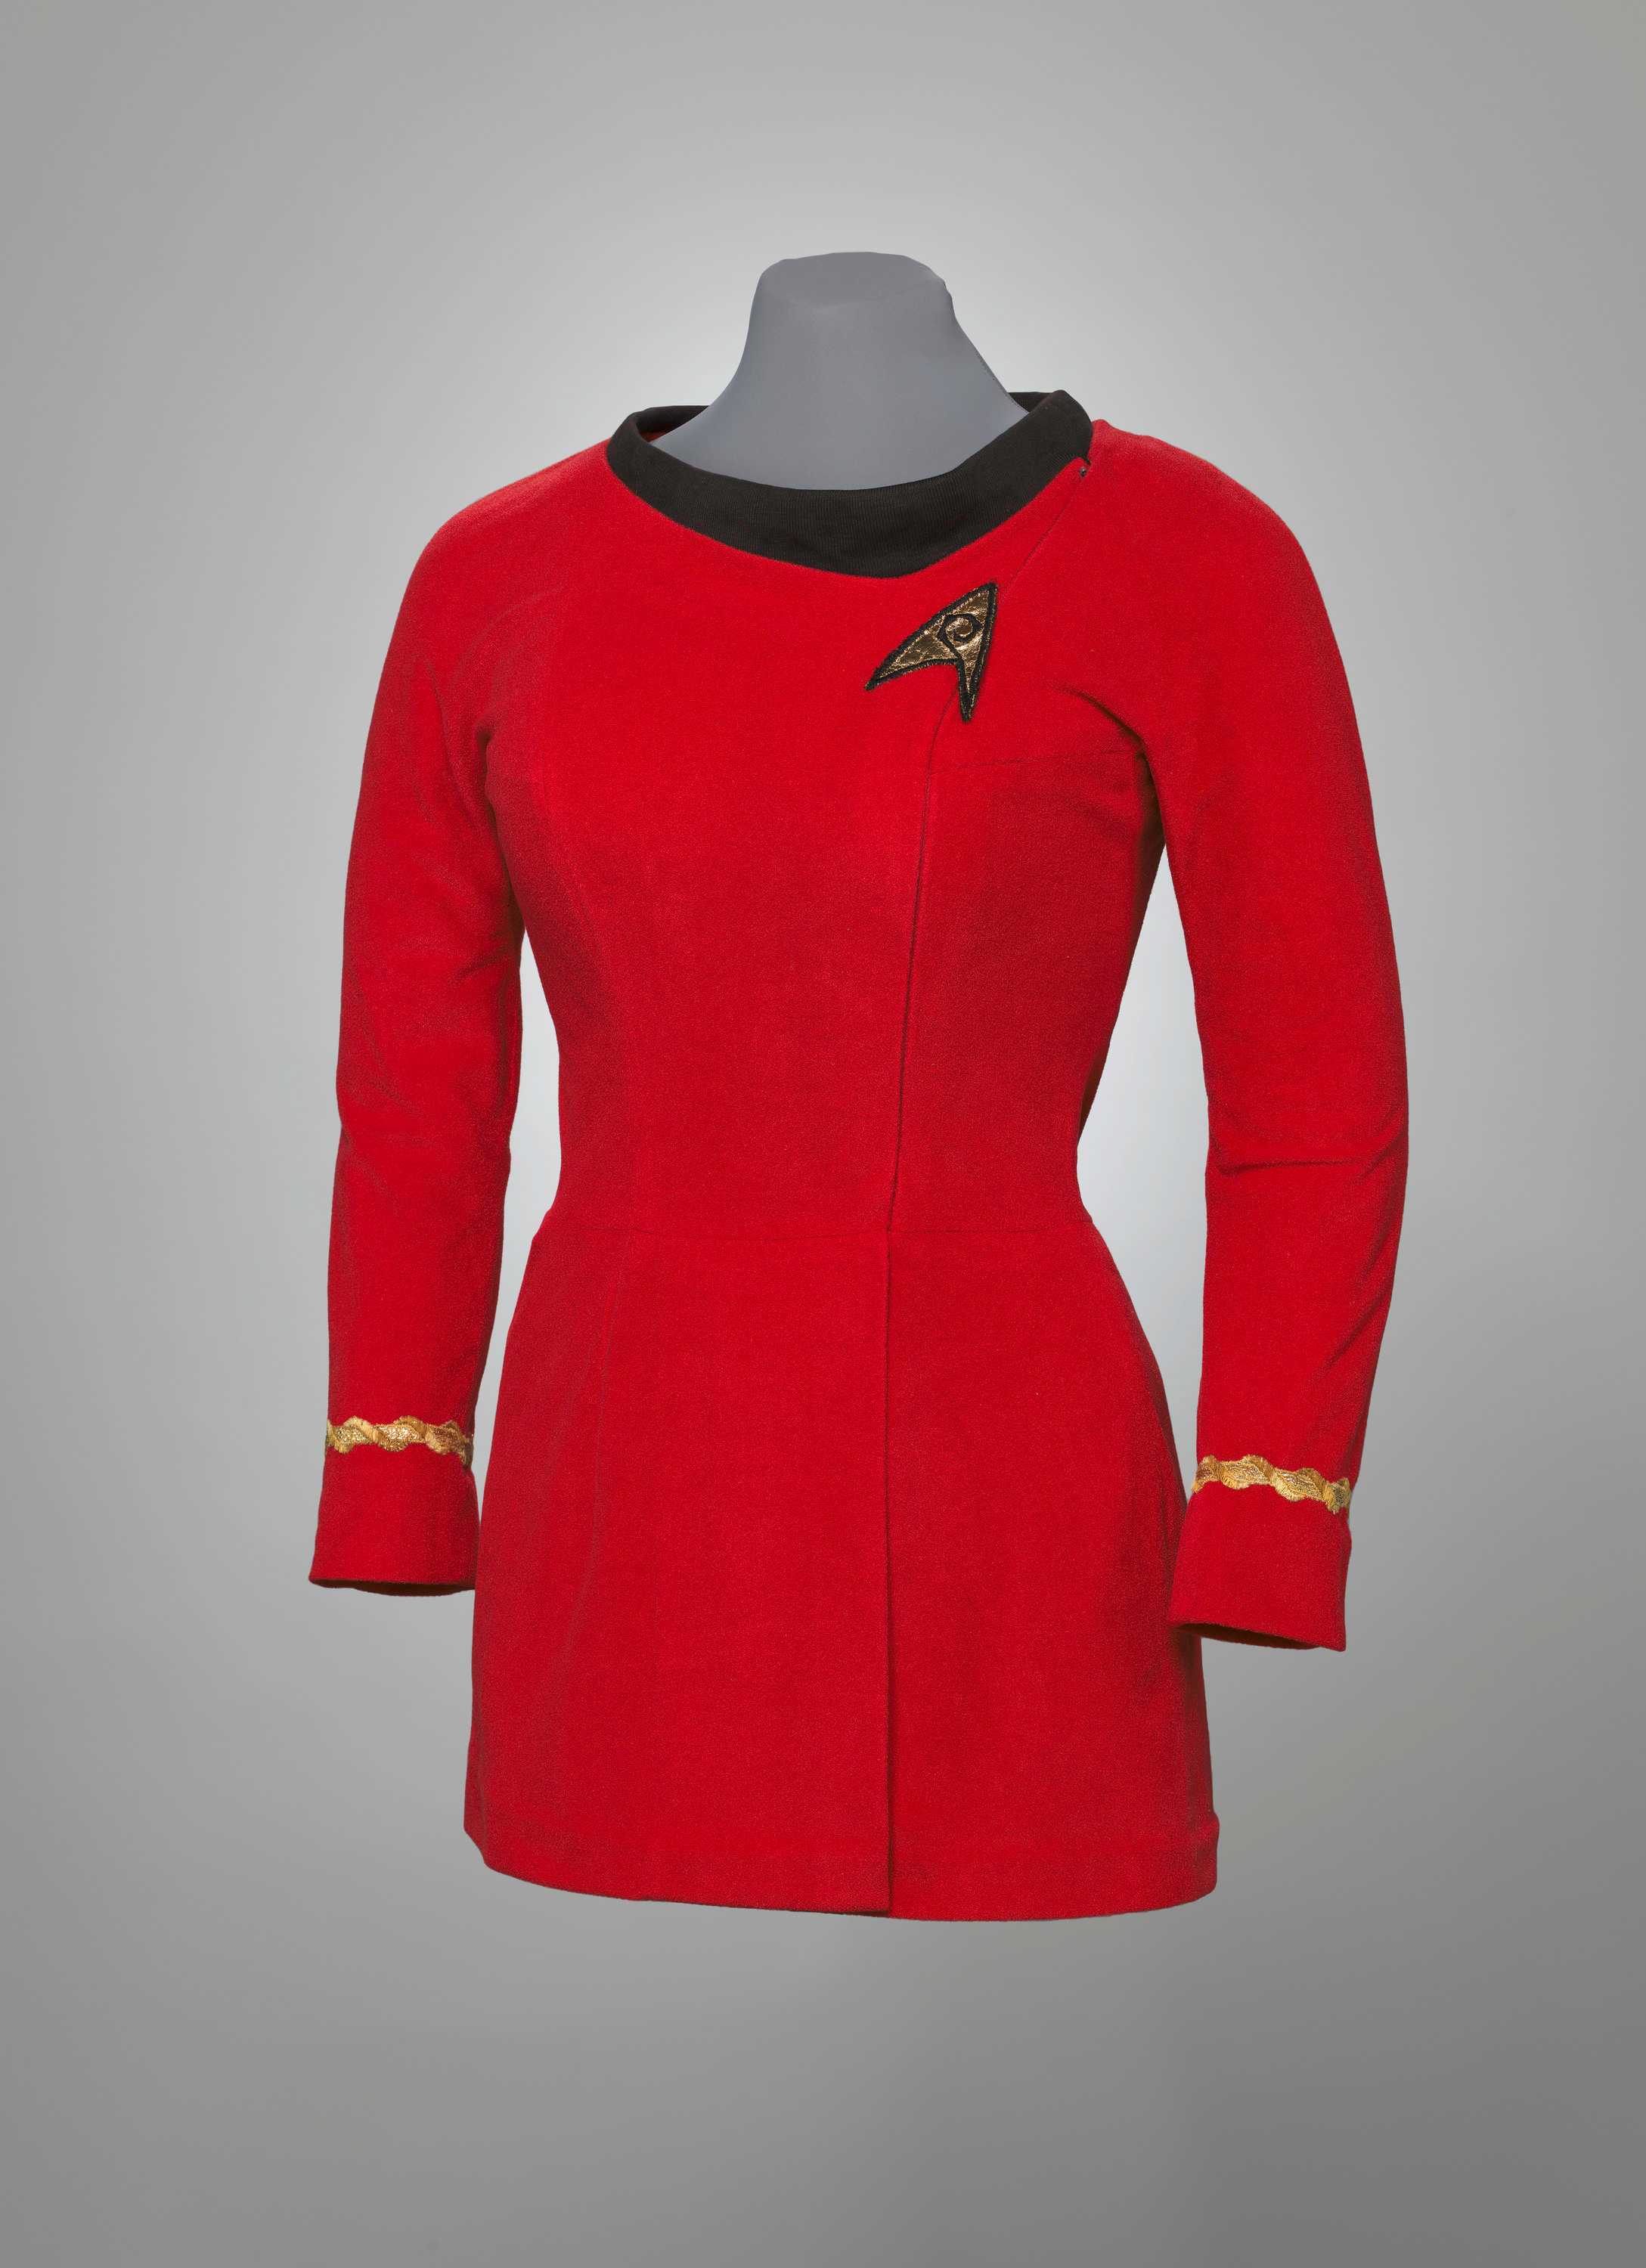 The bright red Starfleet uniform has 3/4th long sleeves and the Starfleet symbol on the right side of the collar.